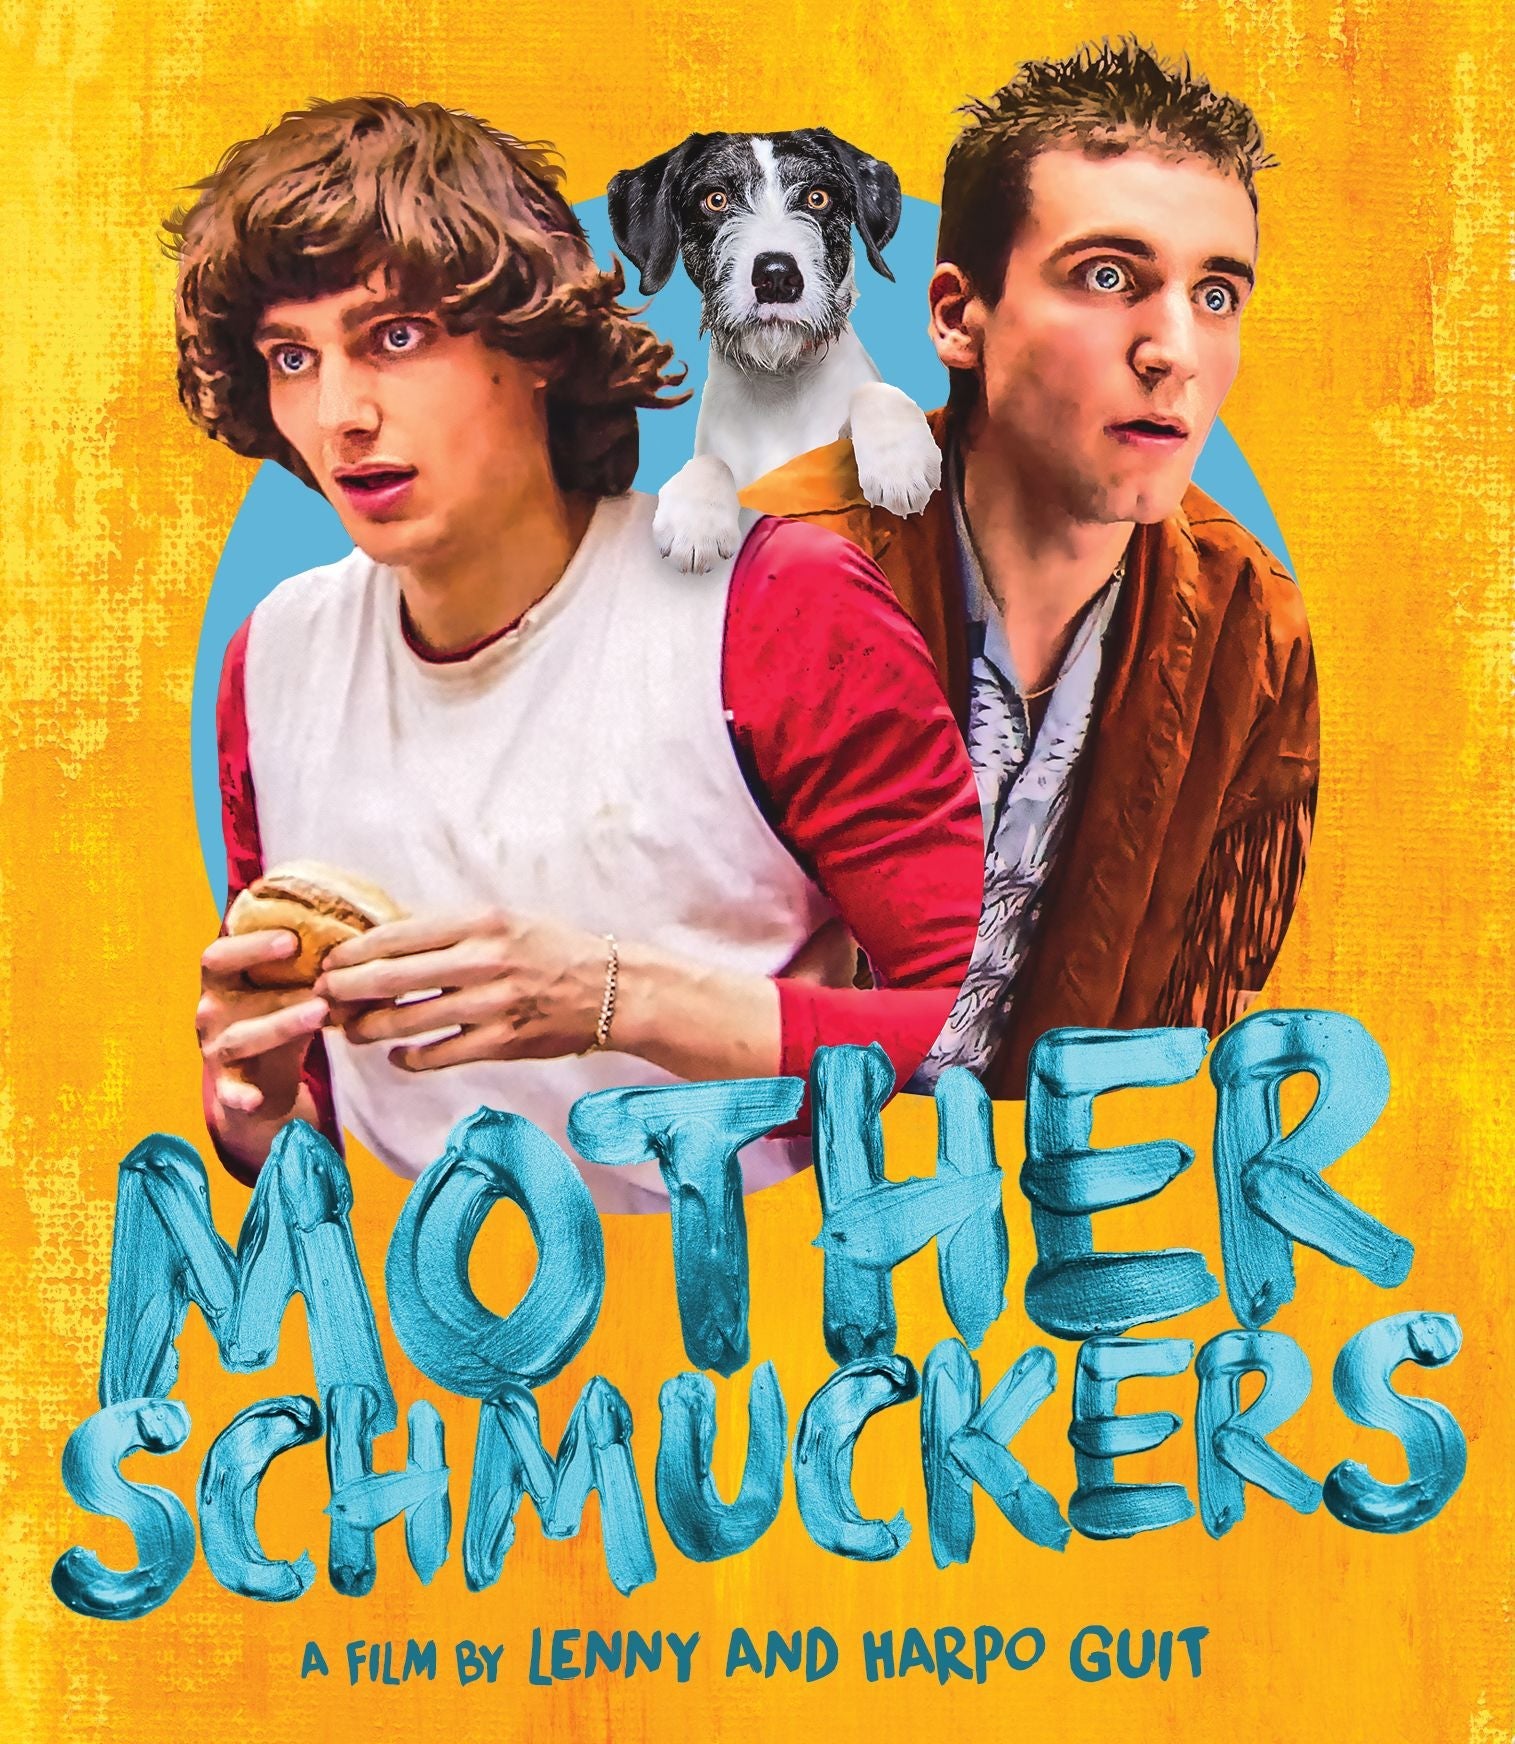 MOTHER SCHMUCKERS (LIMITED EDITION) BLU-RAY